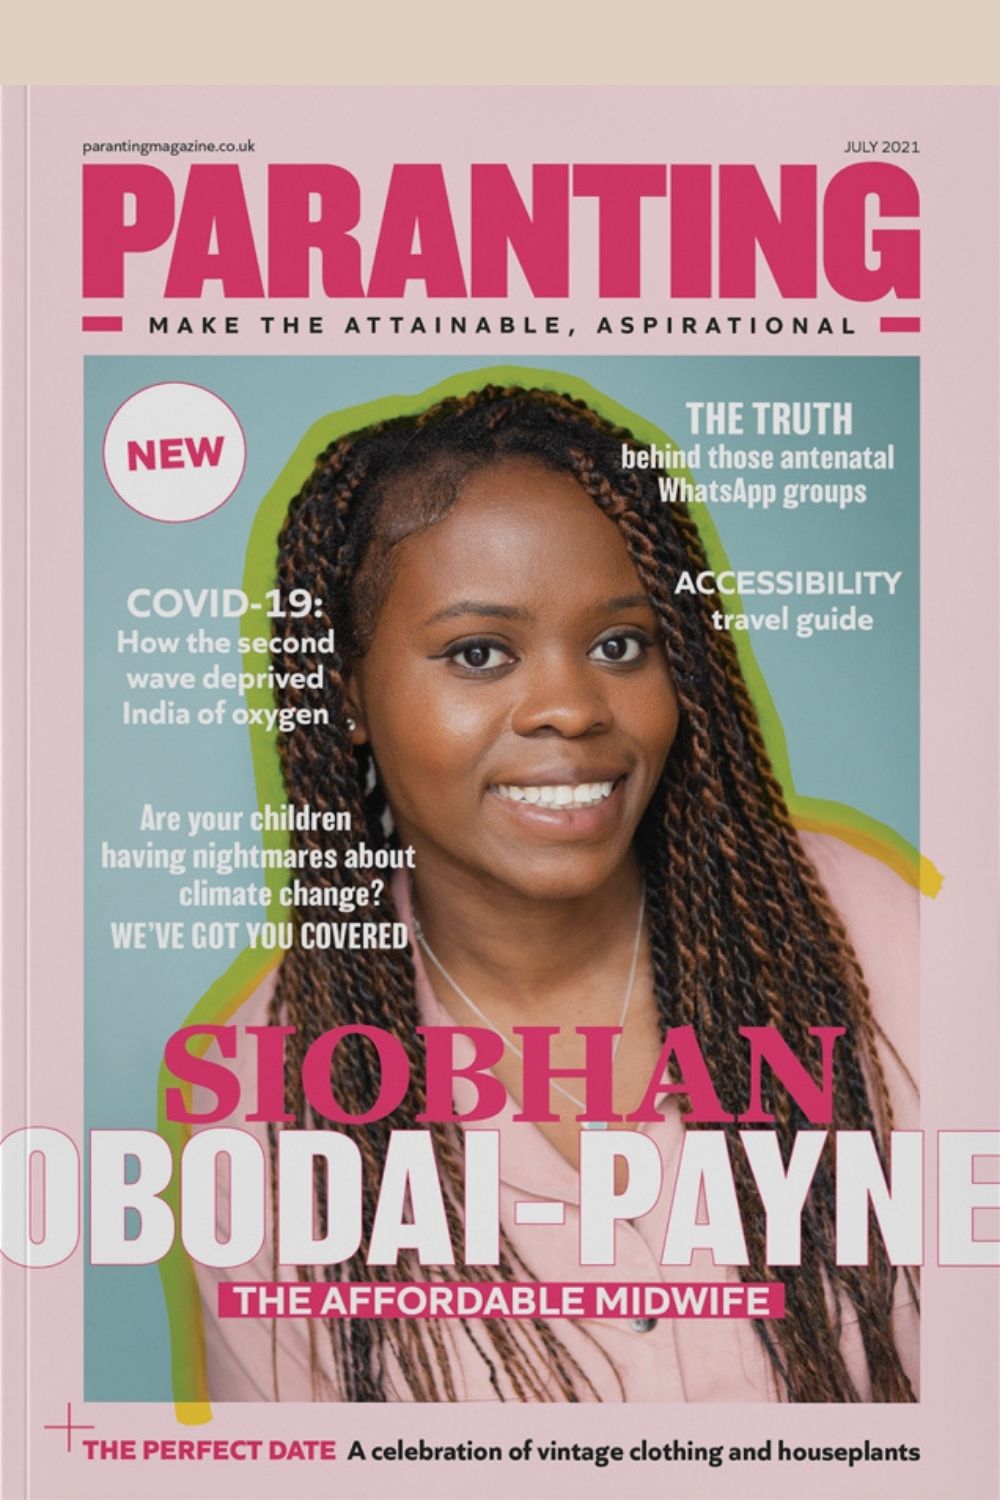 Paranting Magazine Issue #1 Front cover